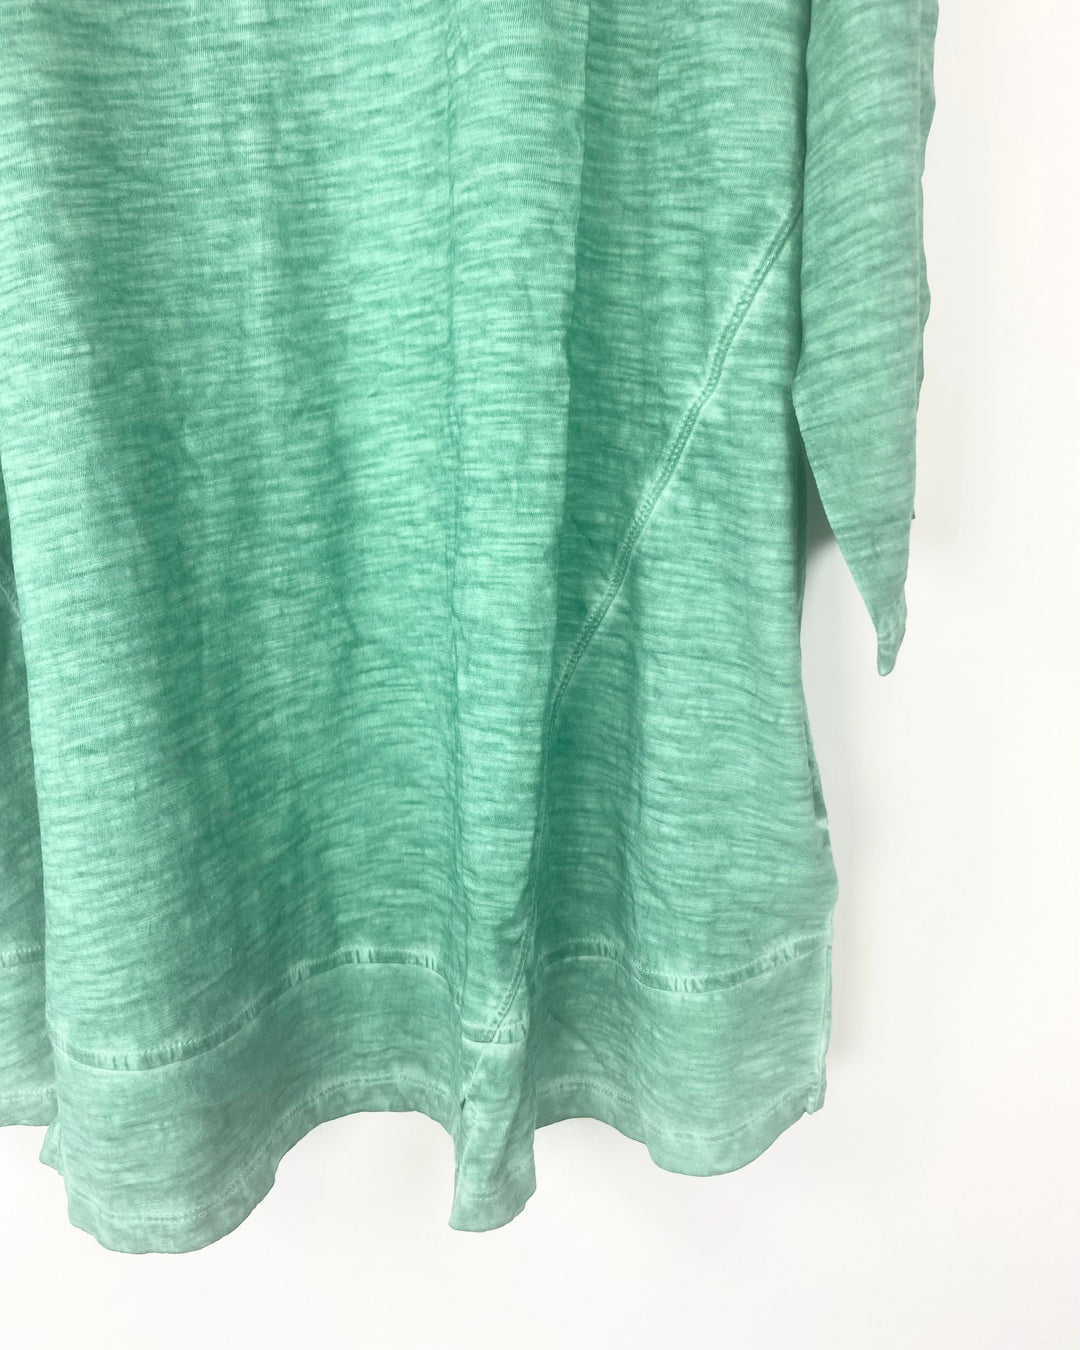 Ivy Green Shirt - Small and 1X